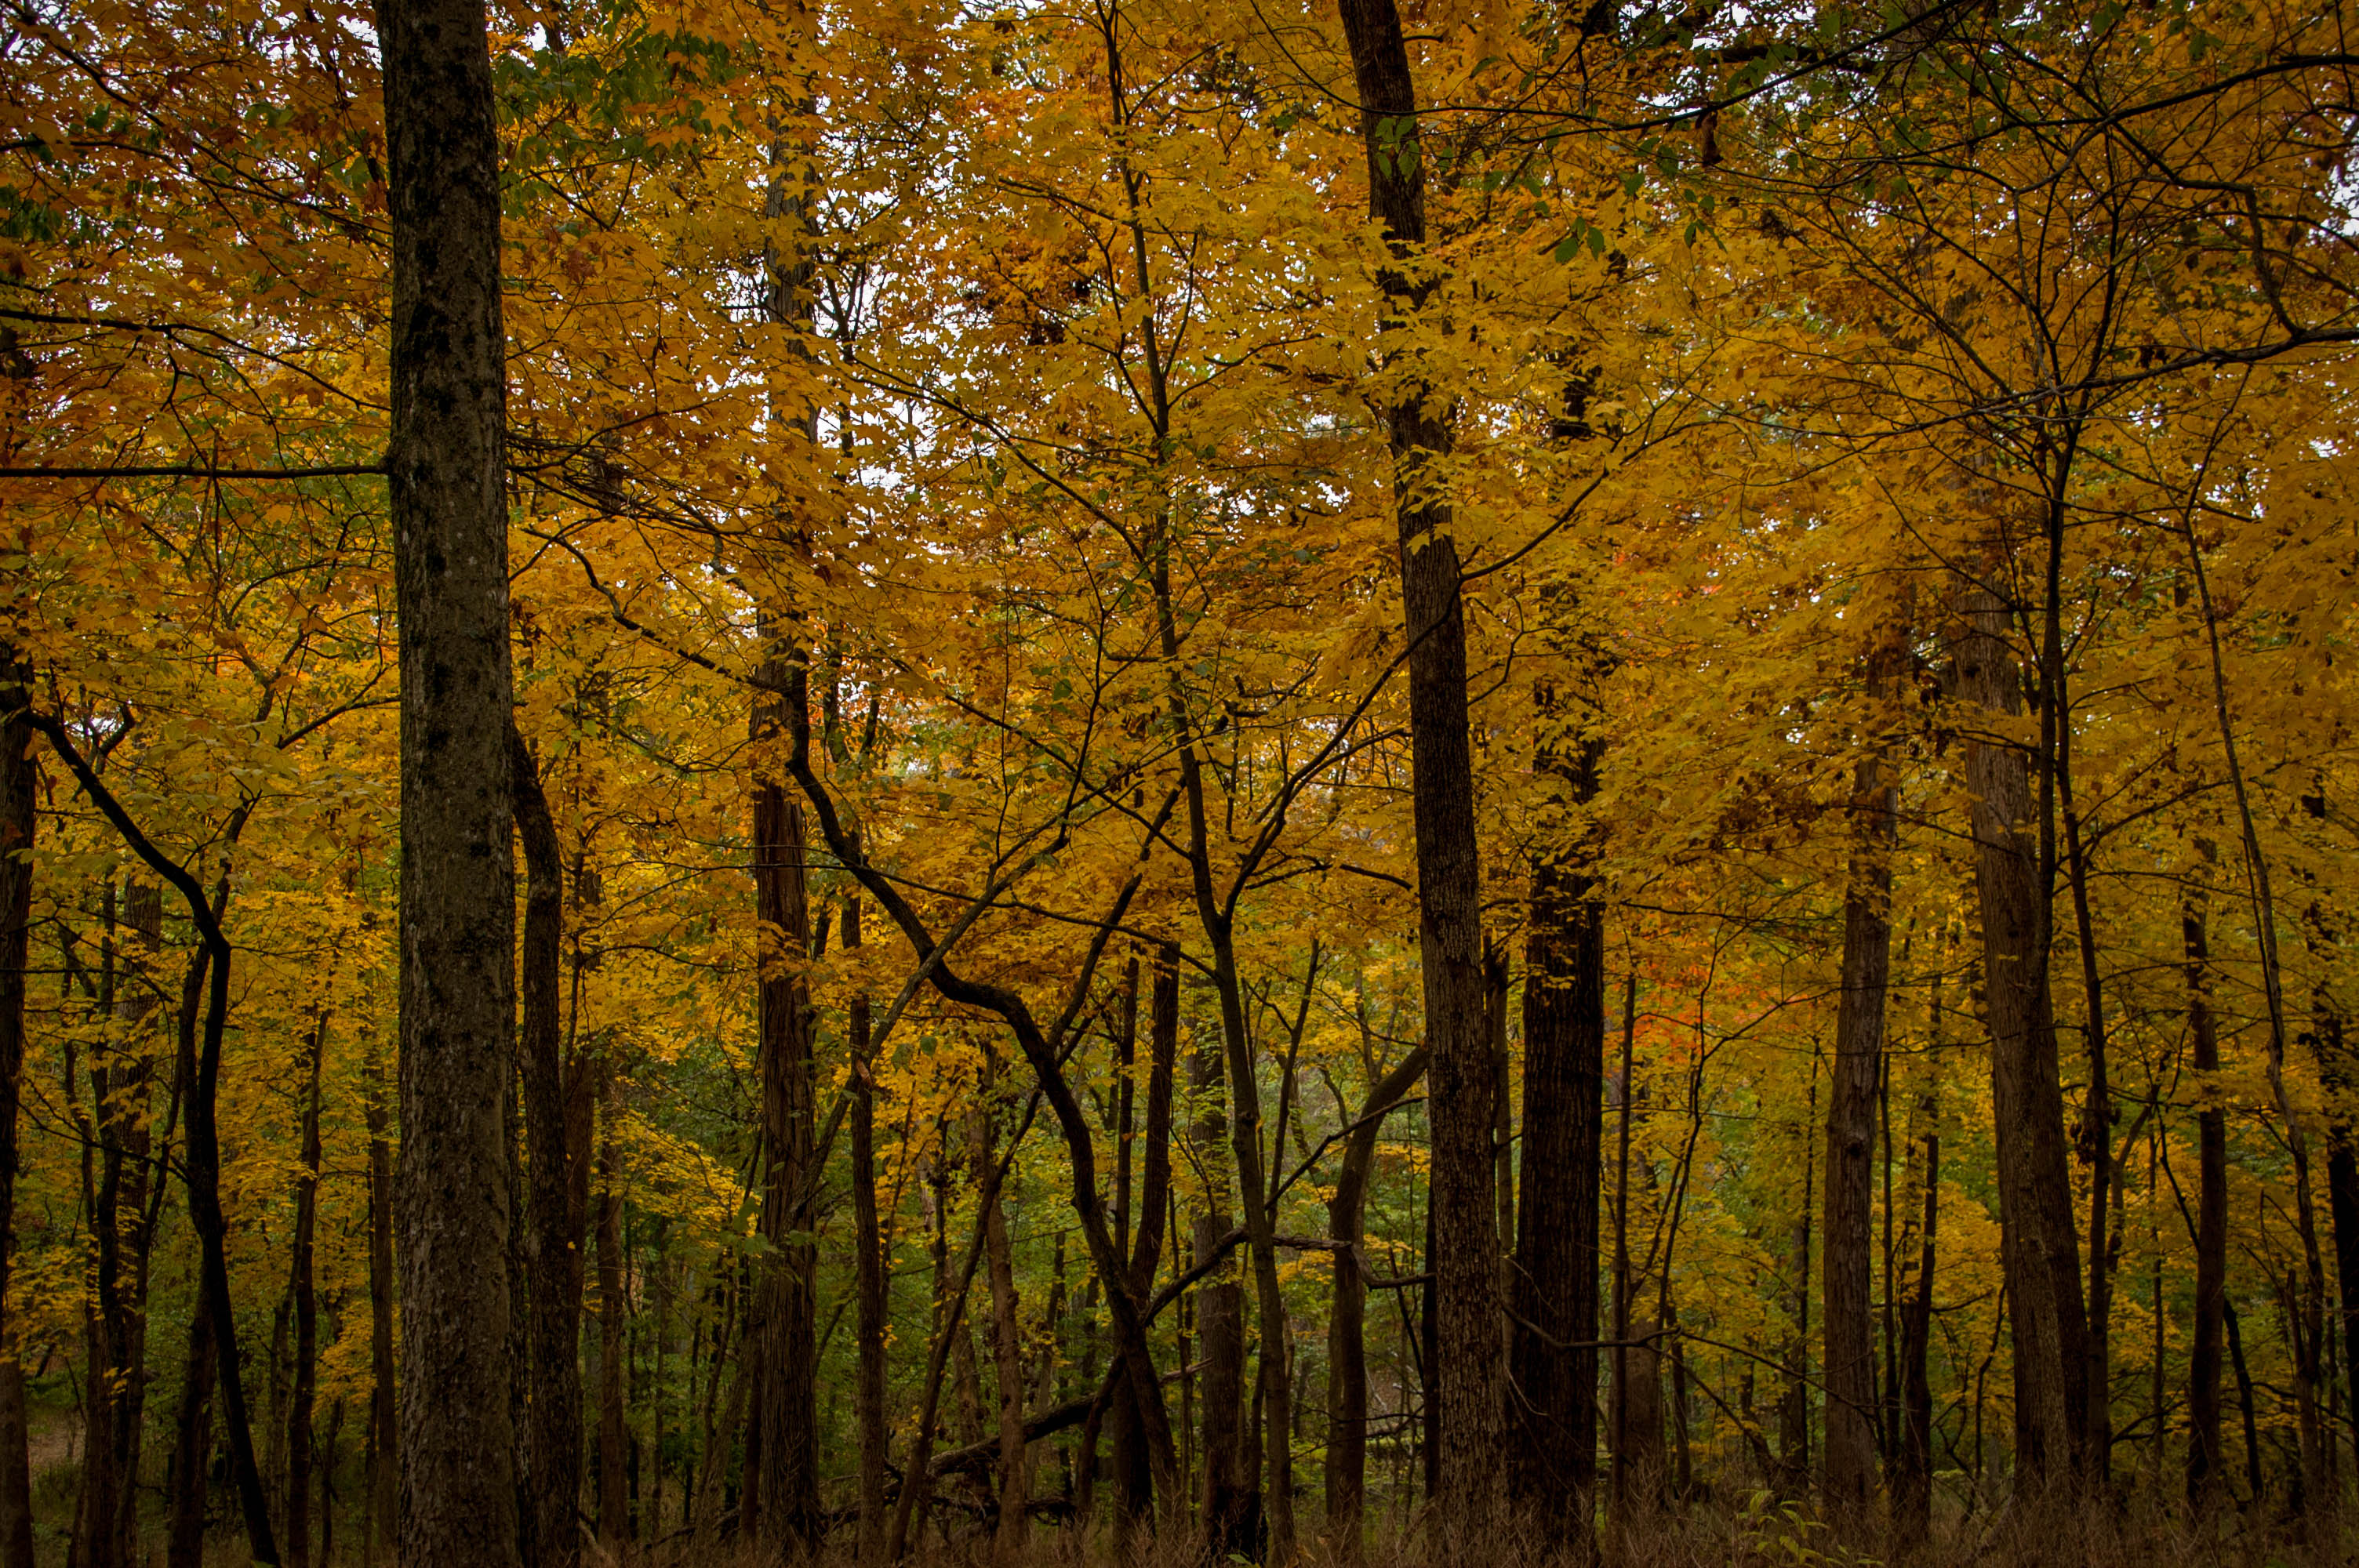 Forested area with yellow leaves in the fall